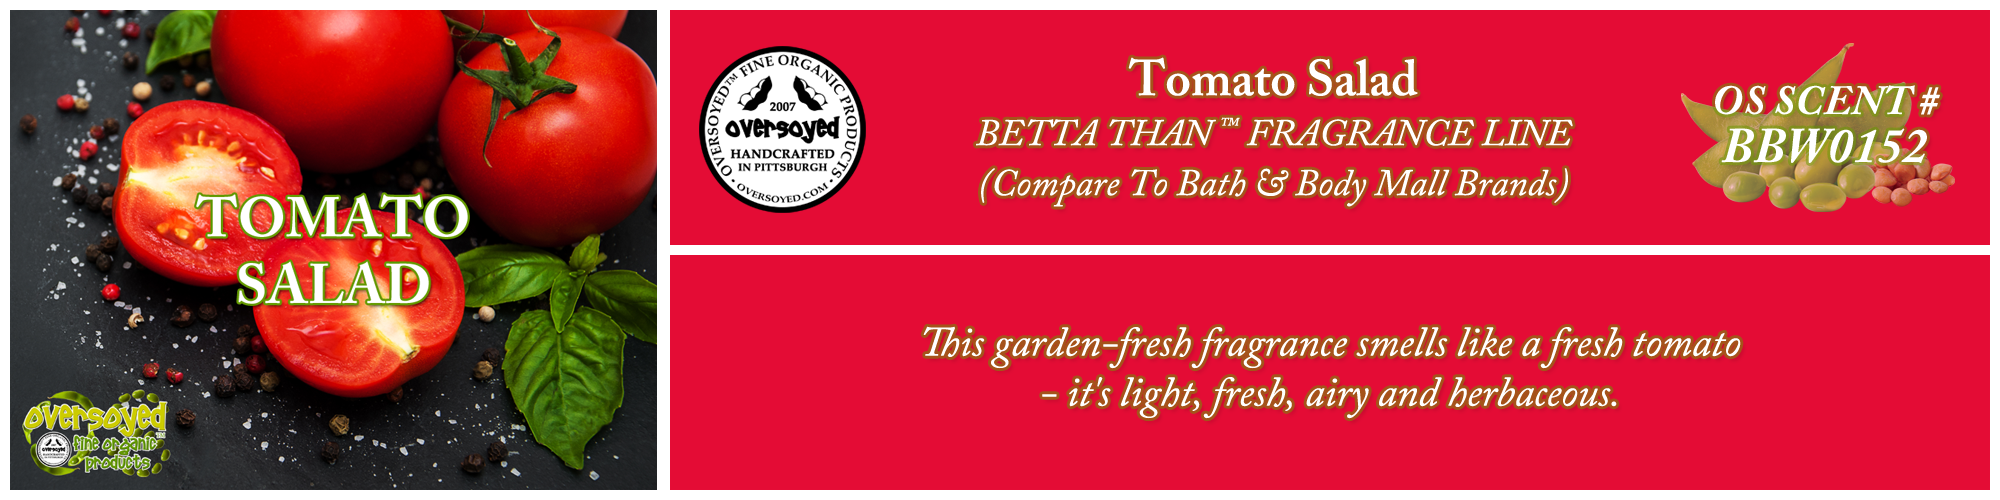 Tomato Salad Handcrafted Products Collection